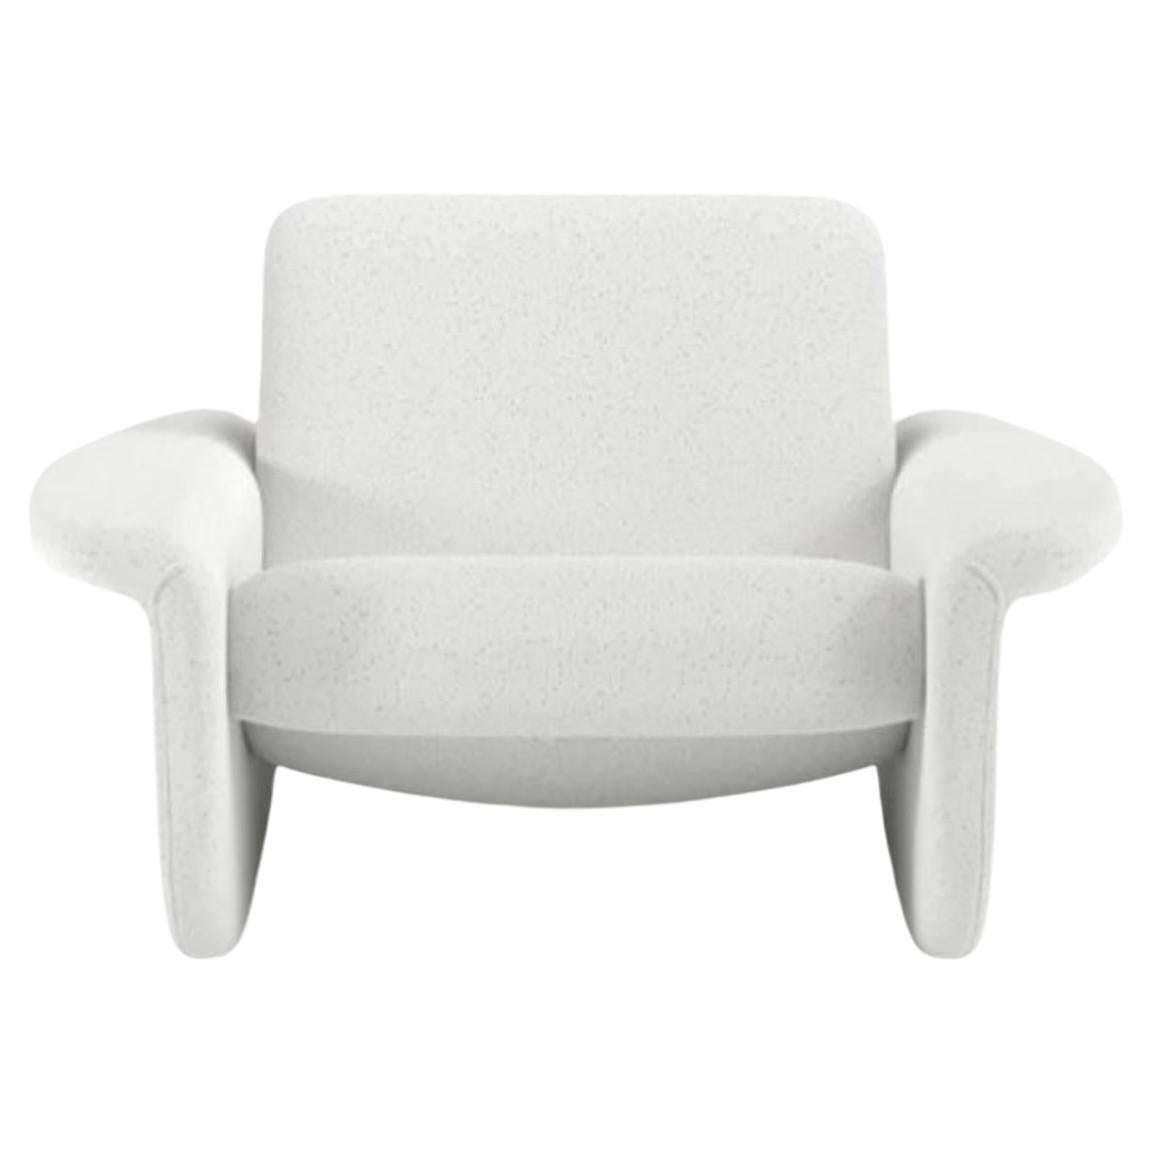 Canoa Lounge Chair by Wentz